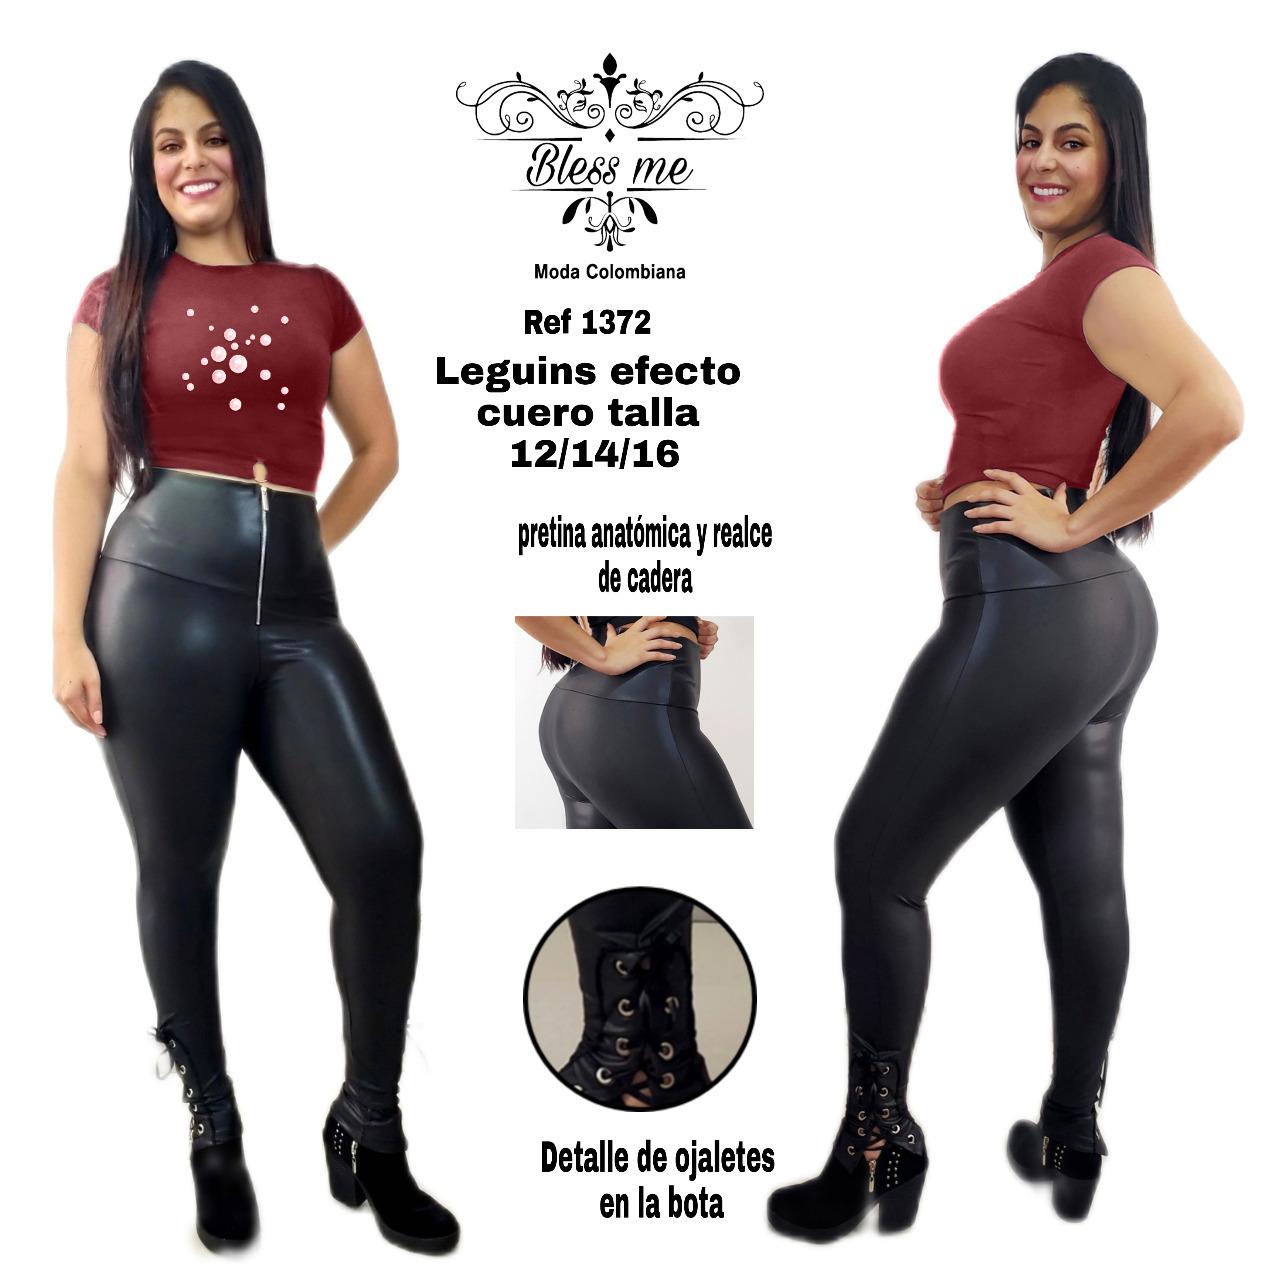 Comprar Leggings Colombianos Bless Me online